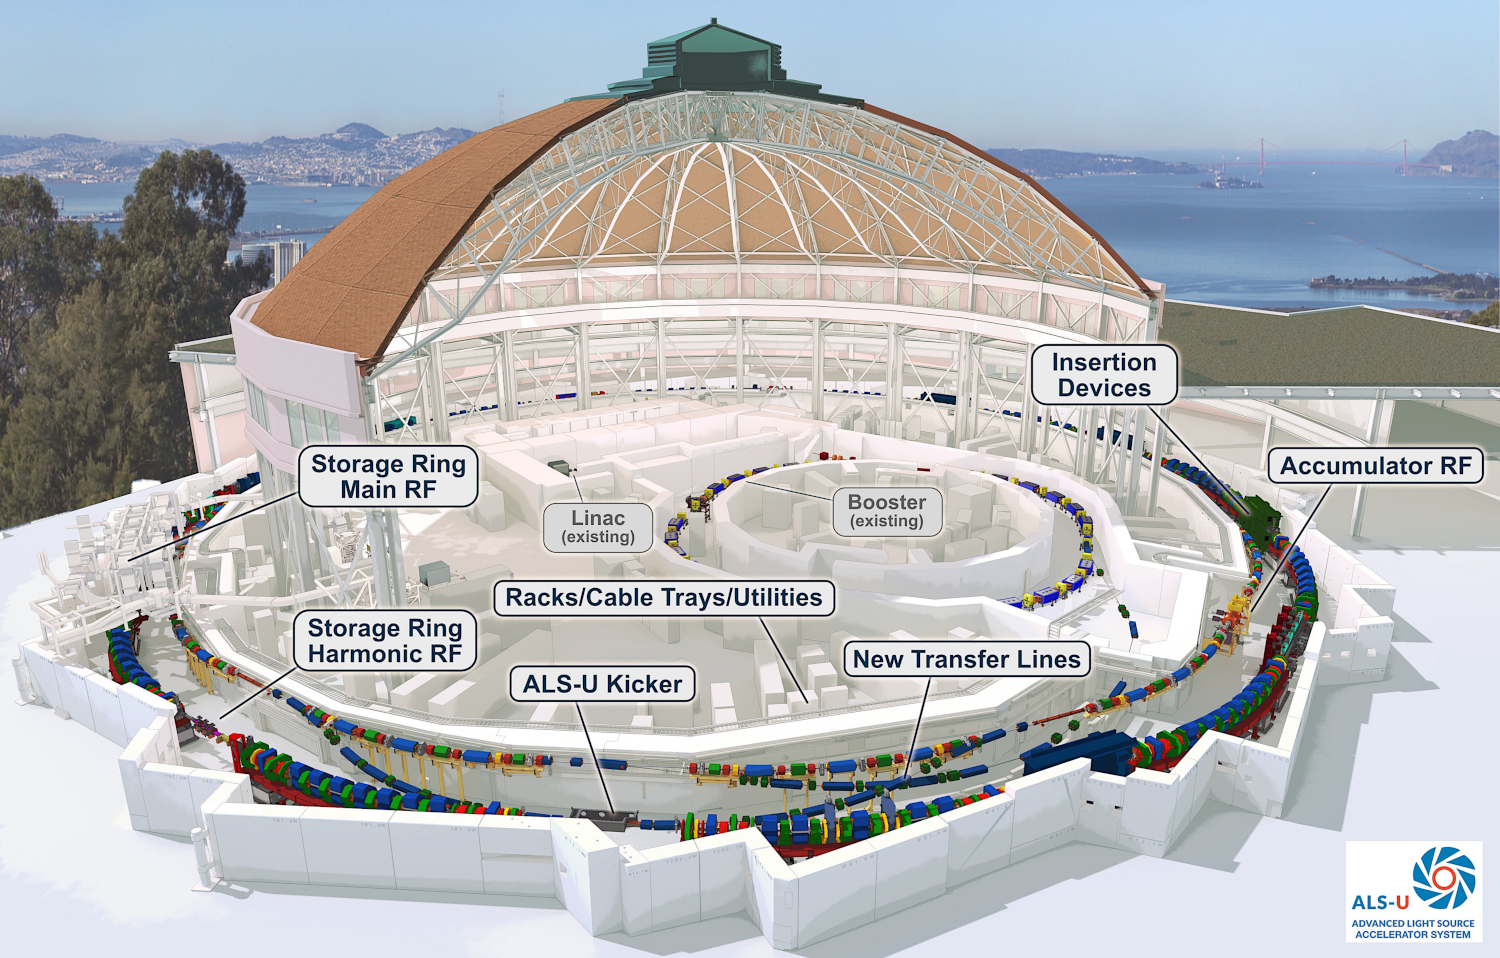 Cutaway View of the ALS Showing a Rendering of the ALS Upgrade Project Components